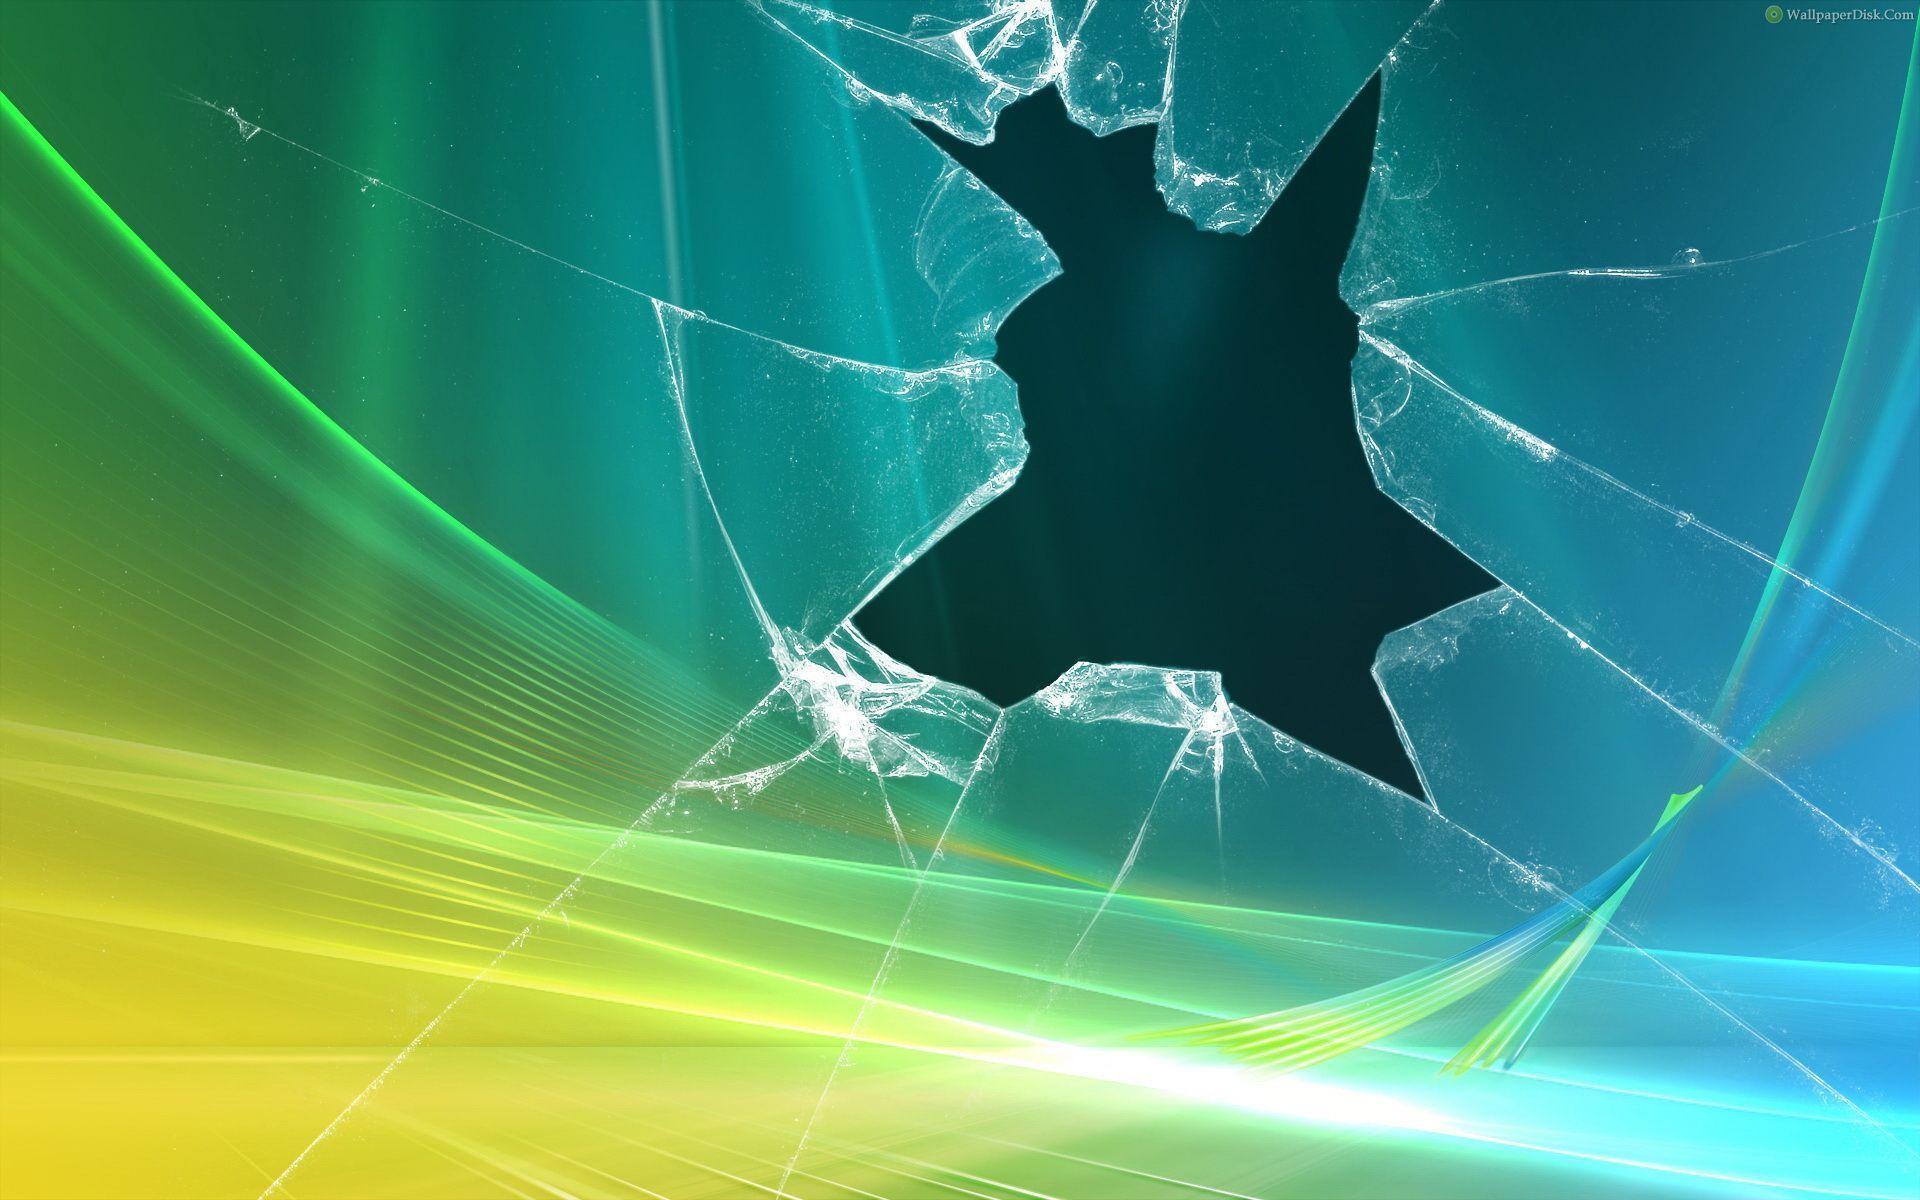 Related Picture More Broken Cracked Screen Please HD Wallpaper